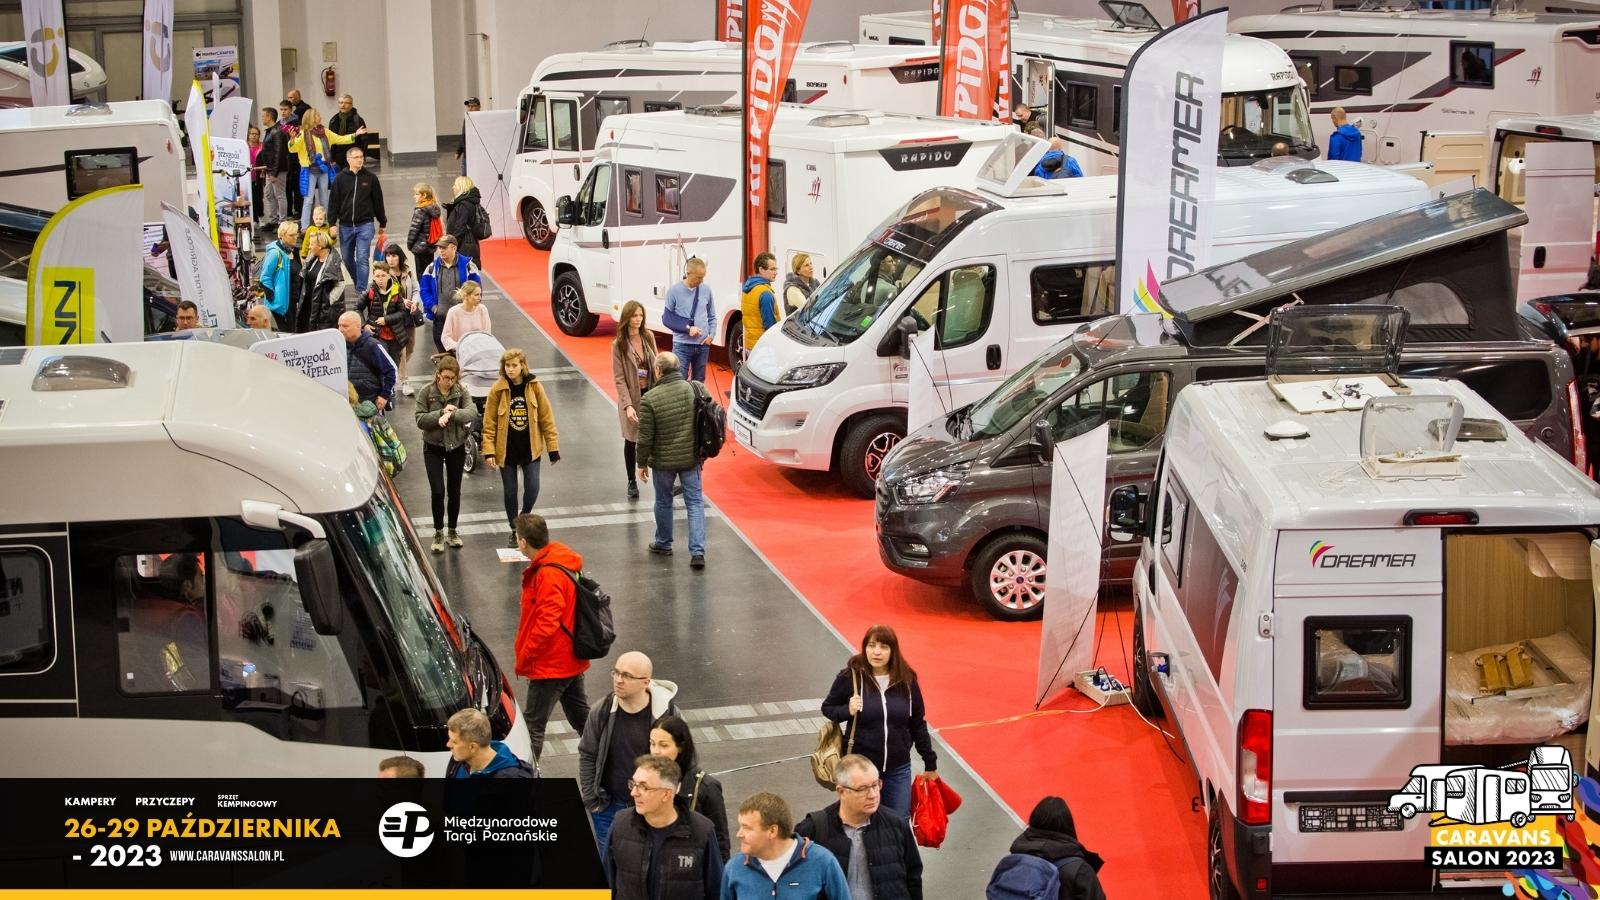 The largest Polish caravanning fair on October 26-29, 2023 in Poznań – main image